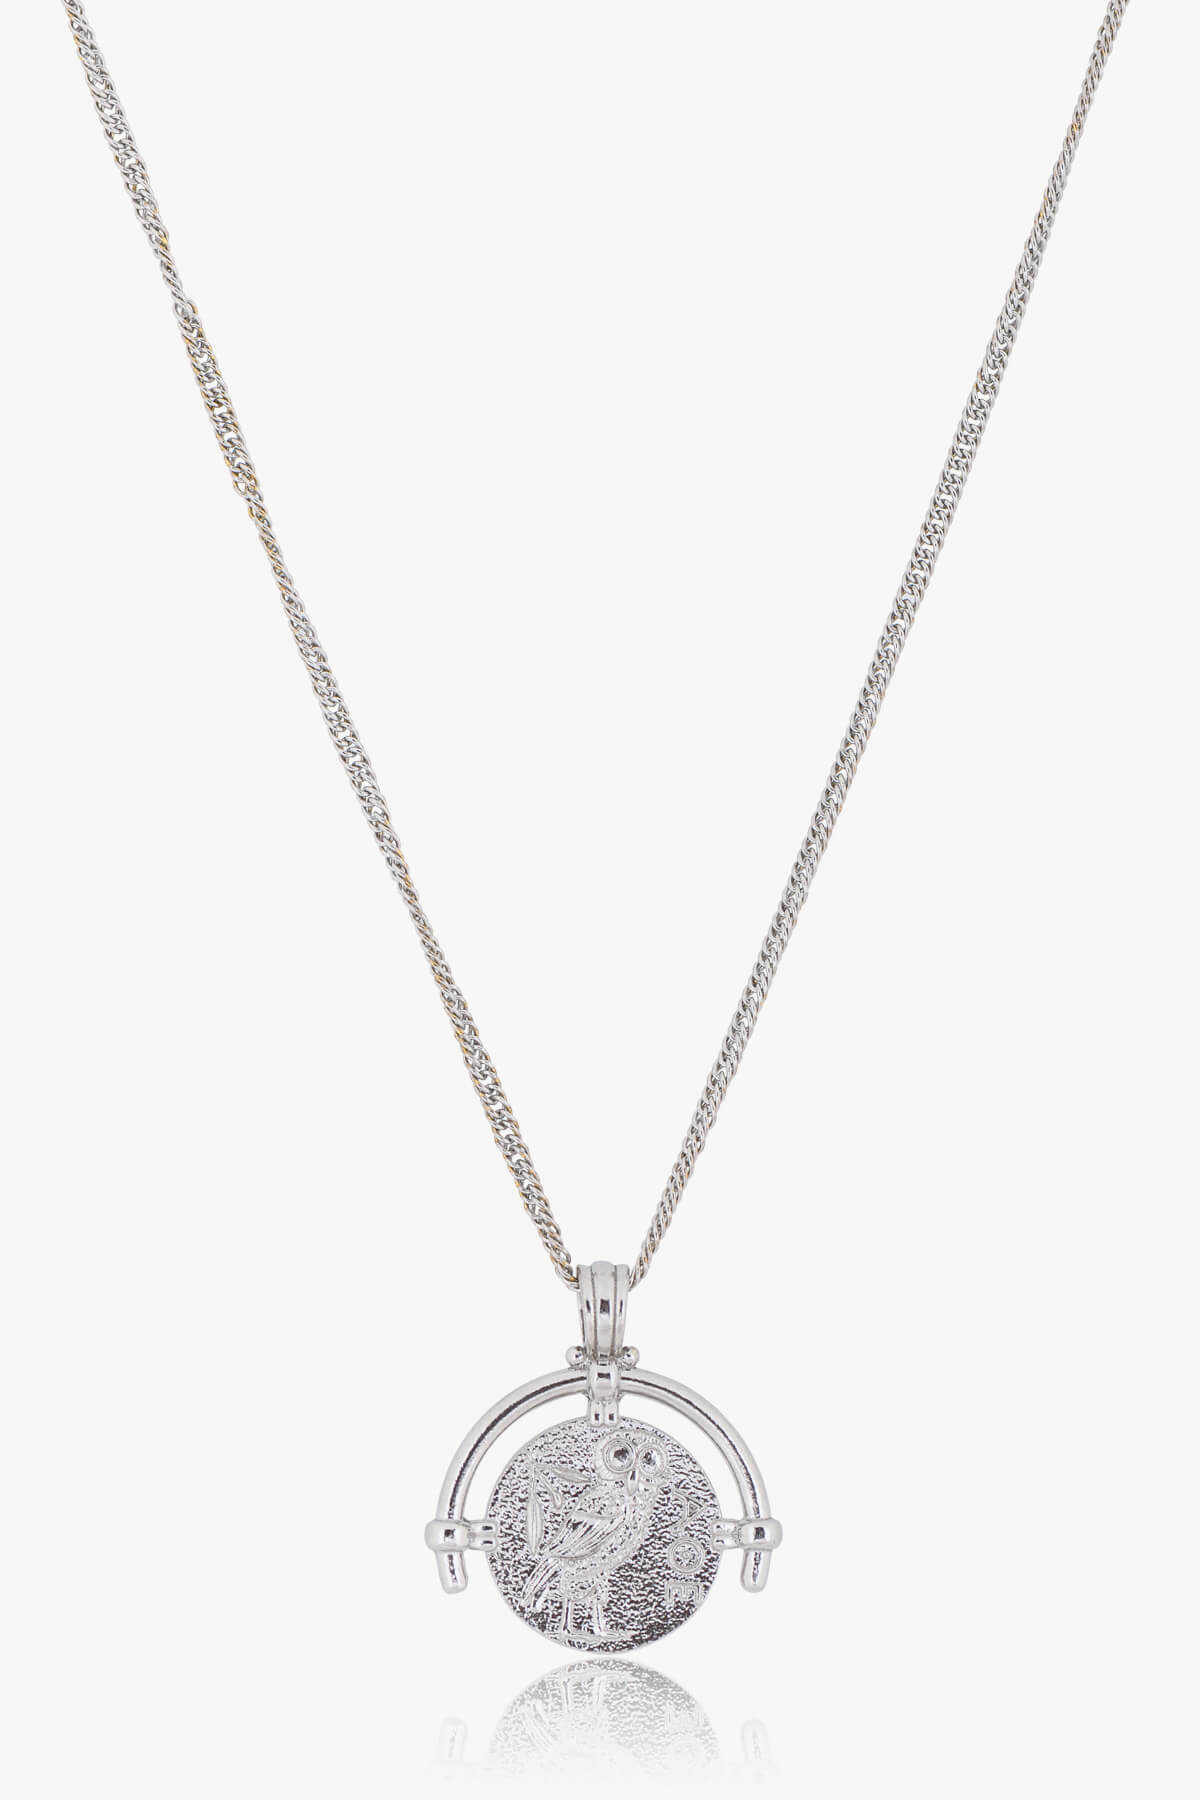 Athena Gold Coin Necklace - Reve Jewel